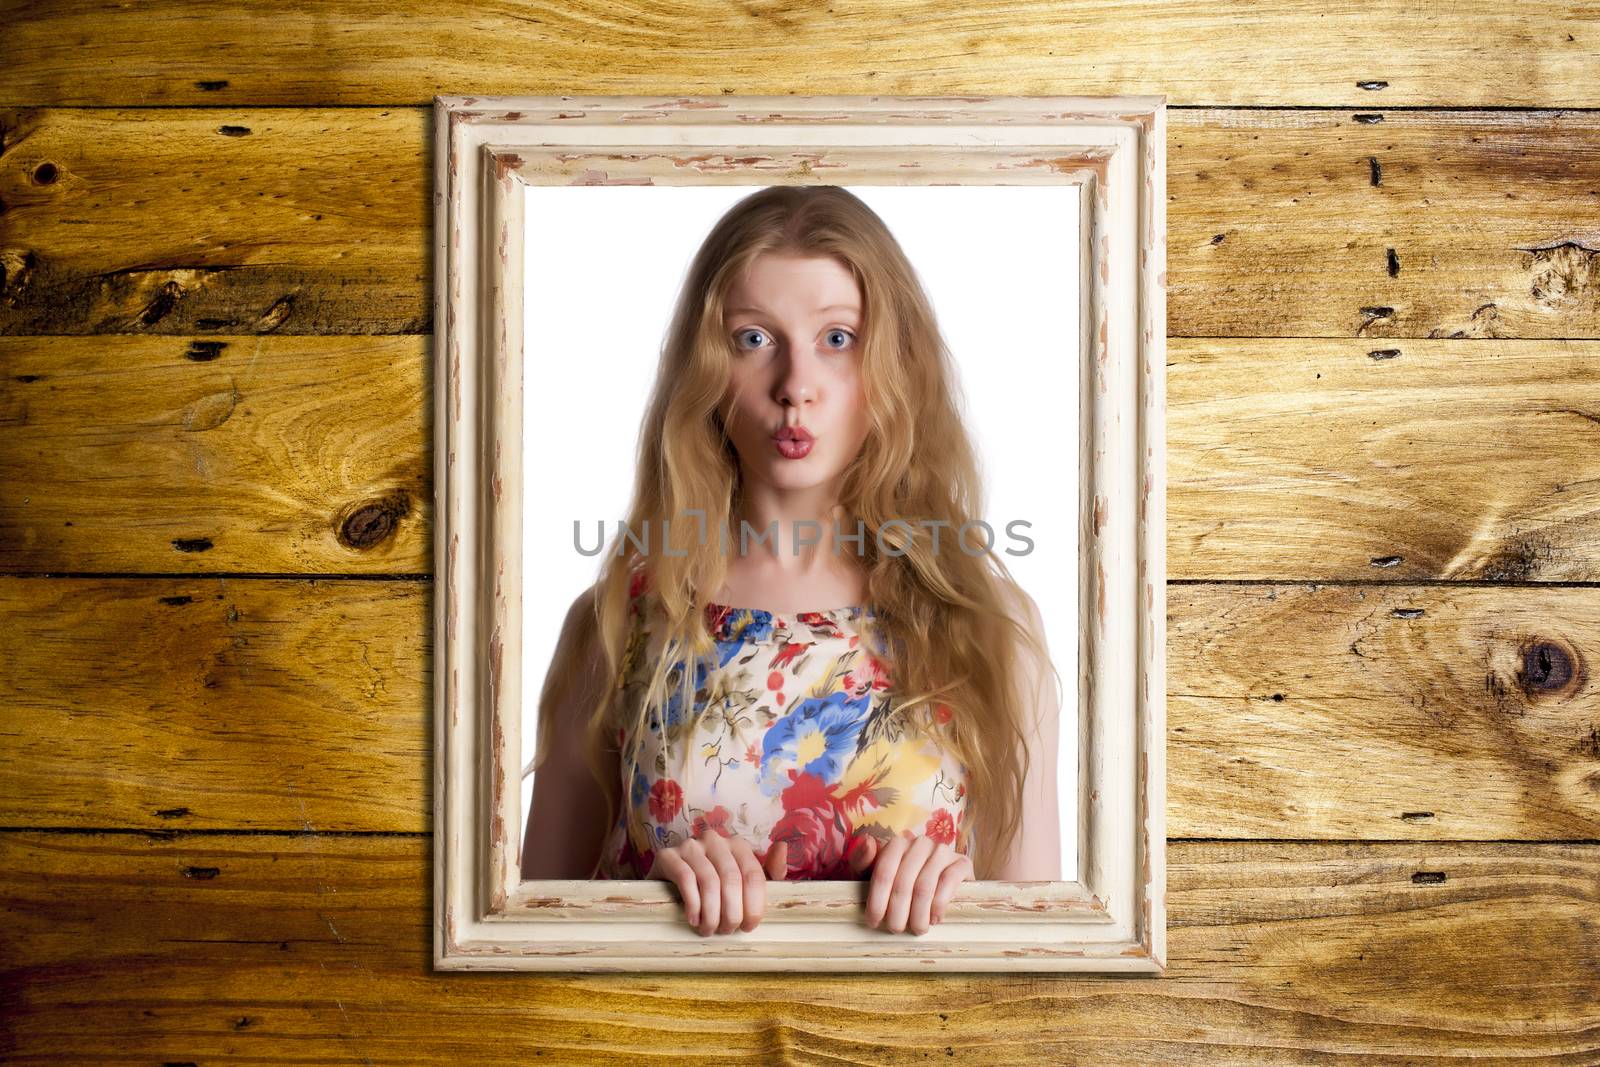 Abstract image of a beautiful woman trapped in a picture frame over a wooden background.